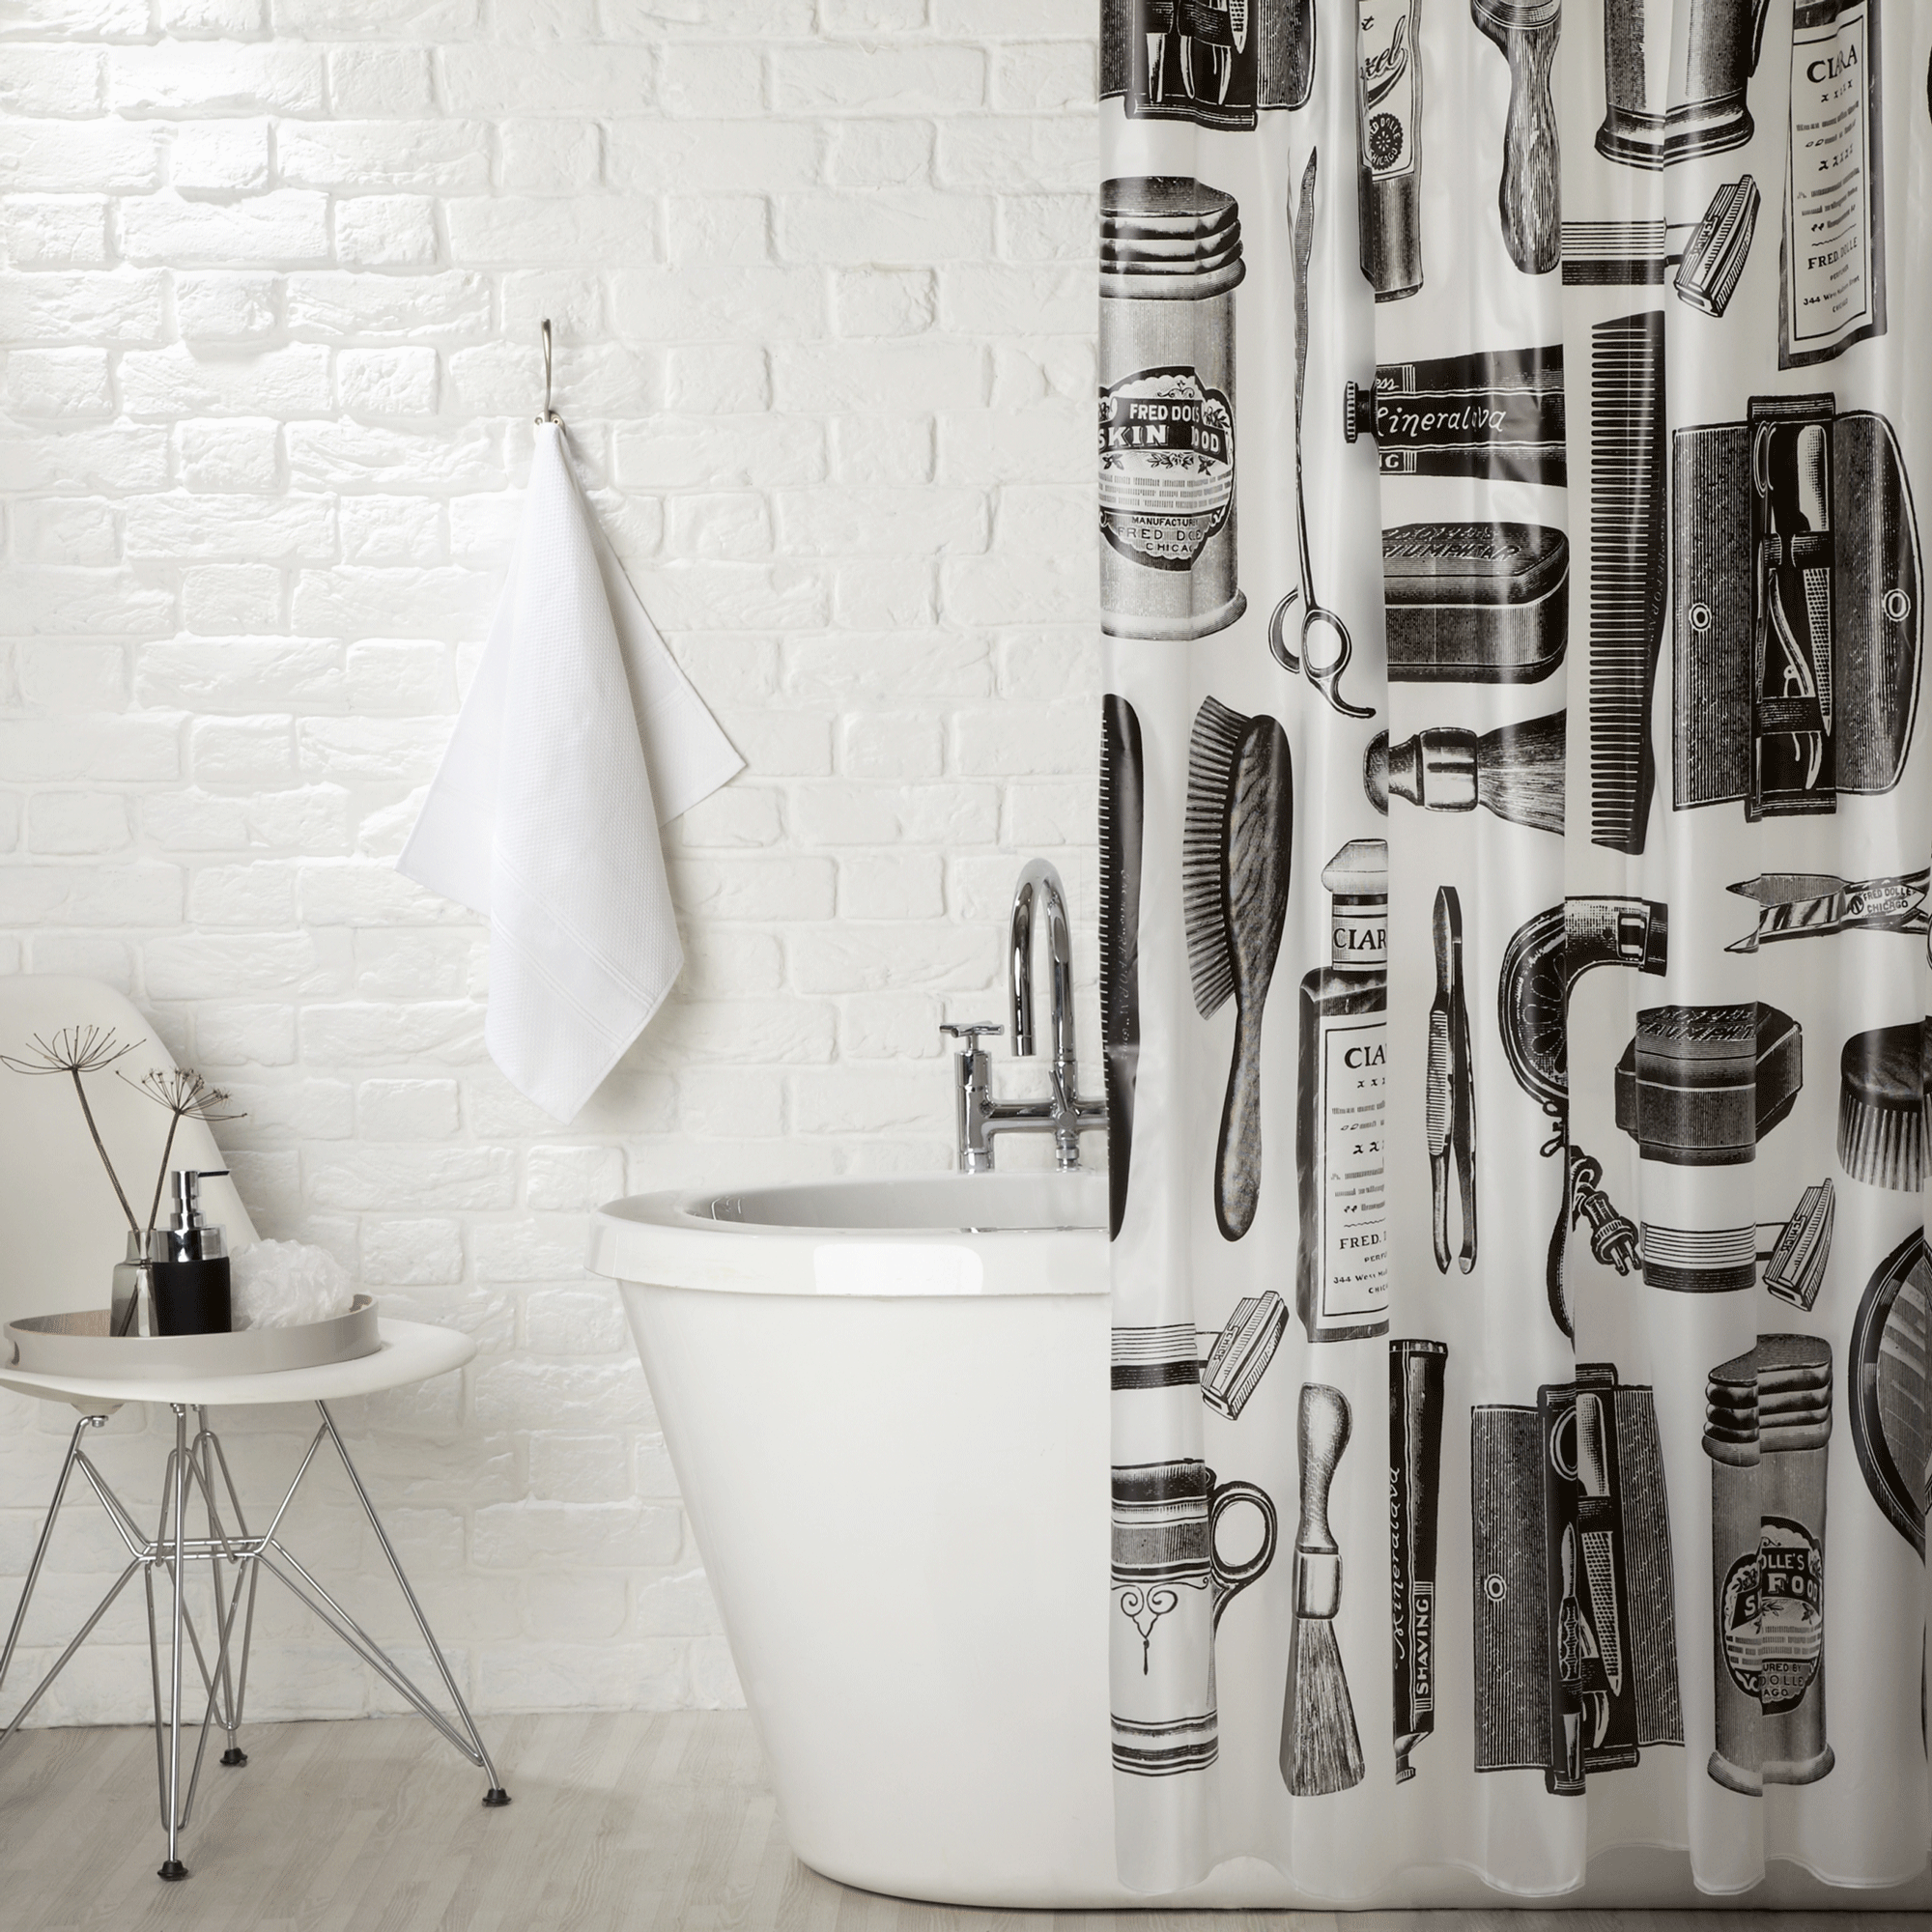 Black and white patterned shower curtain in monochrome bathroom